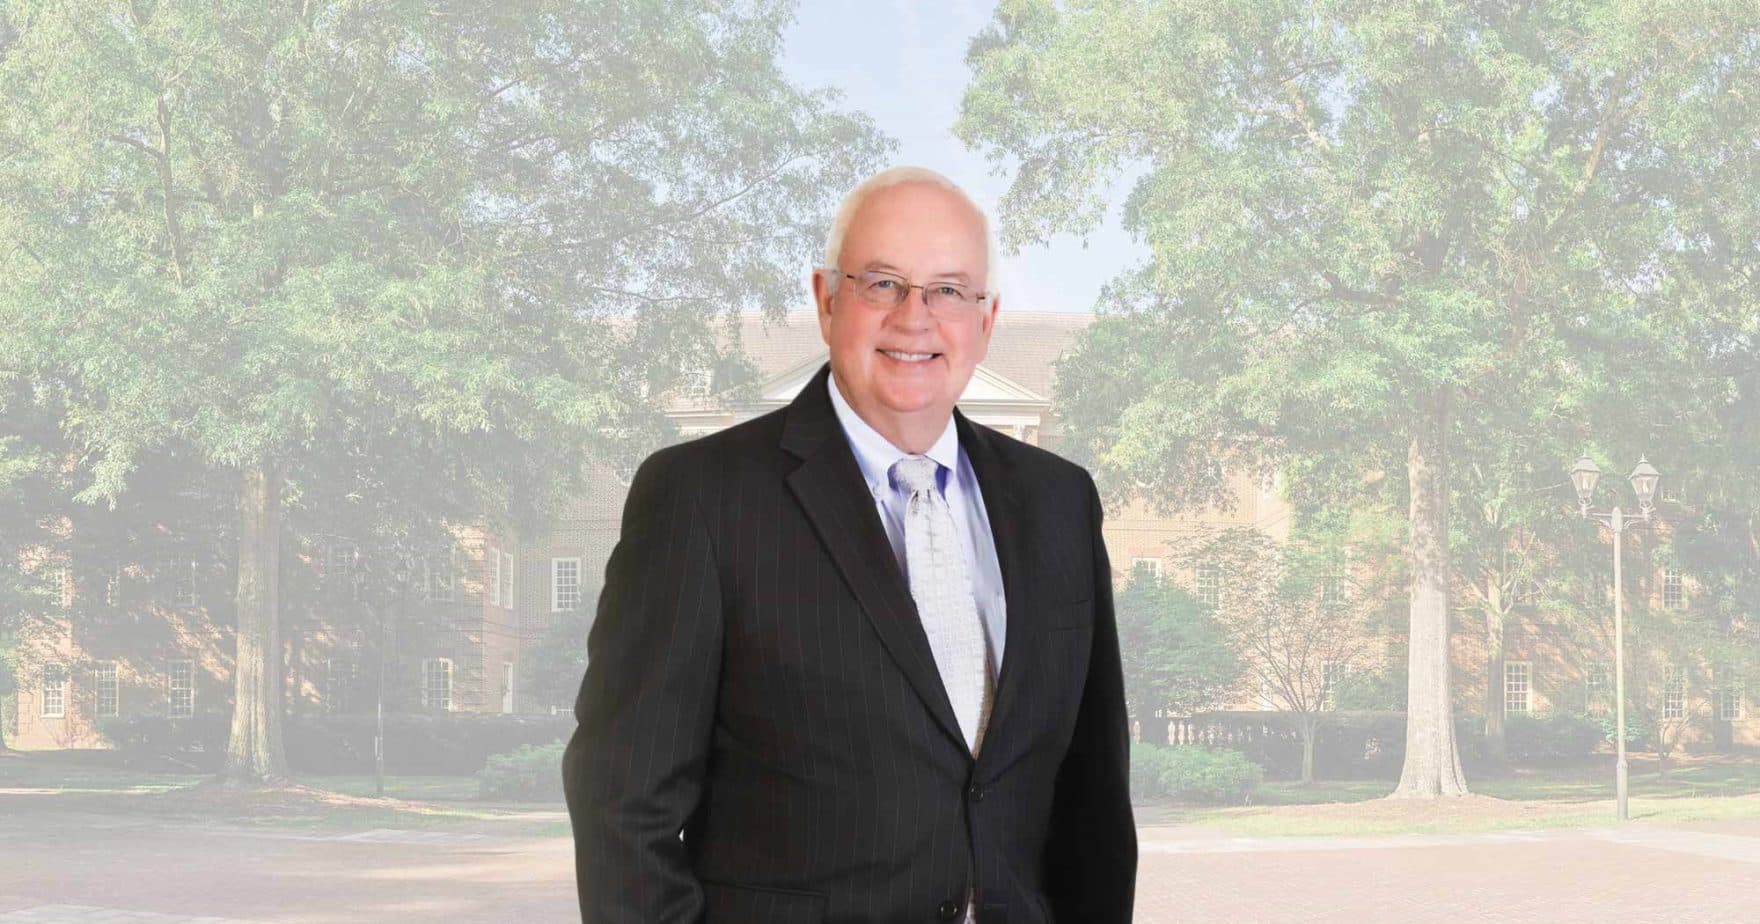 Ken Starr Served Faithfully on Regent University Board of Trustees and Faculty